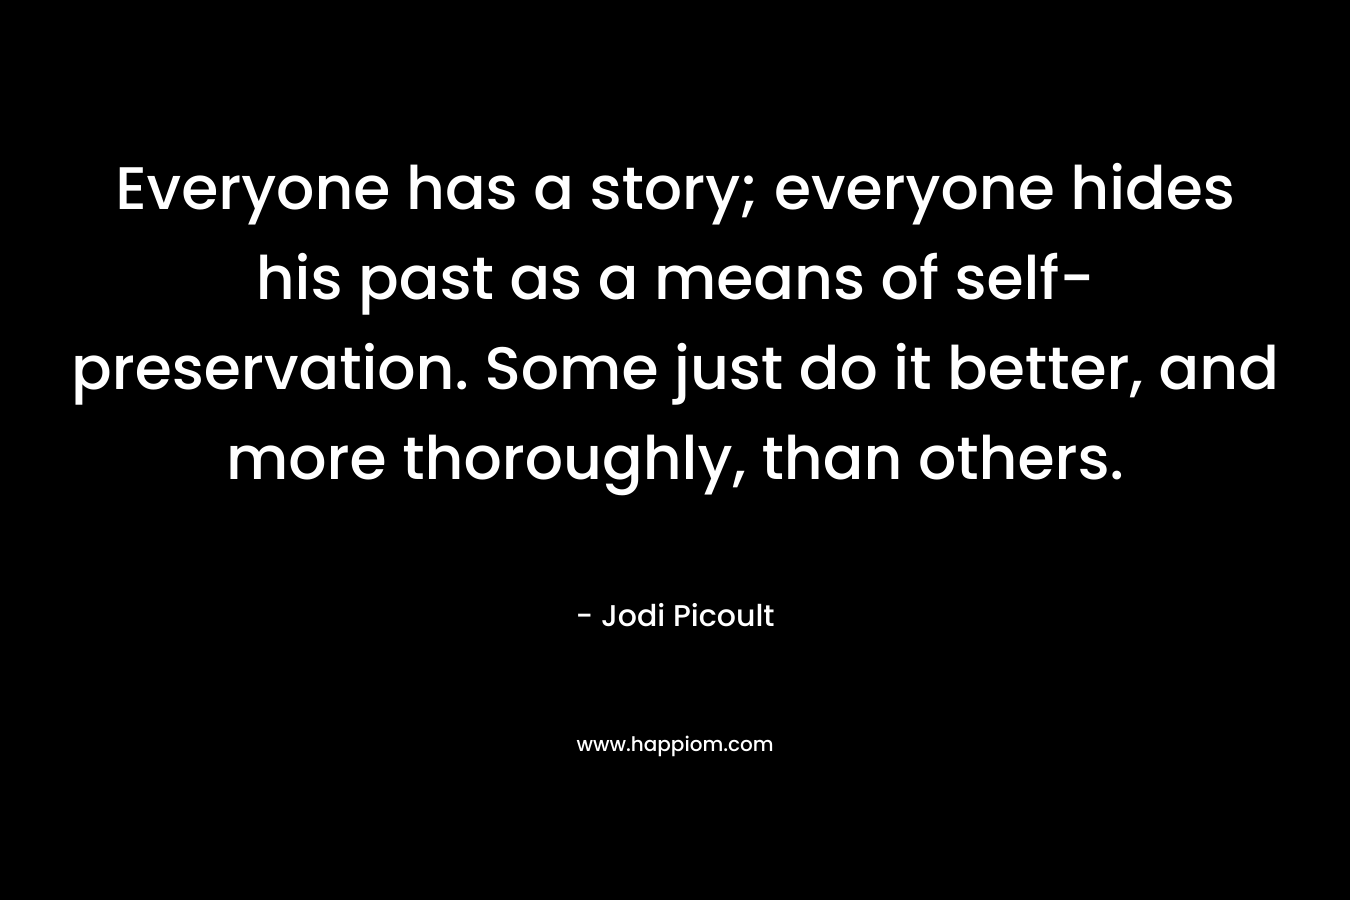 Everyone has a story; everyone hides his past as a means of self-preservation. Some just do it better, and more thoroughly, than others.